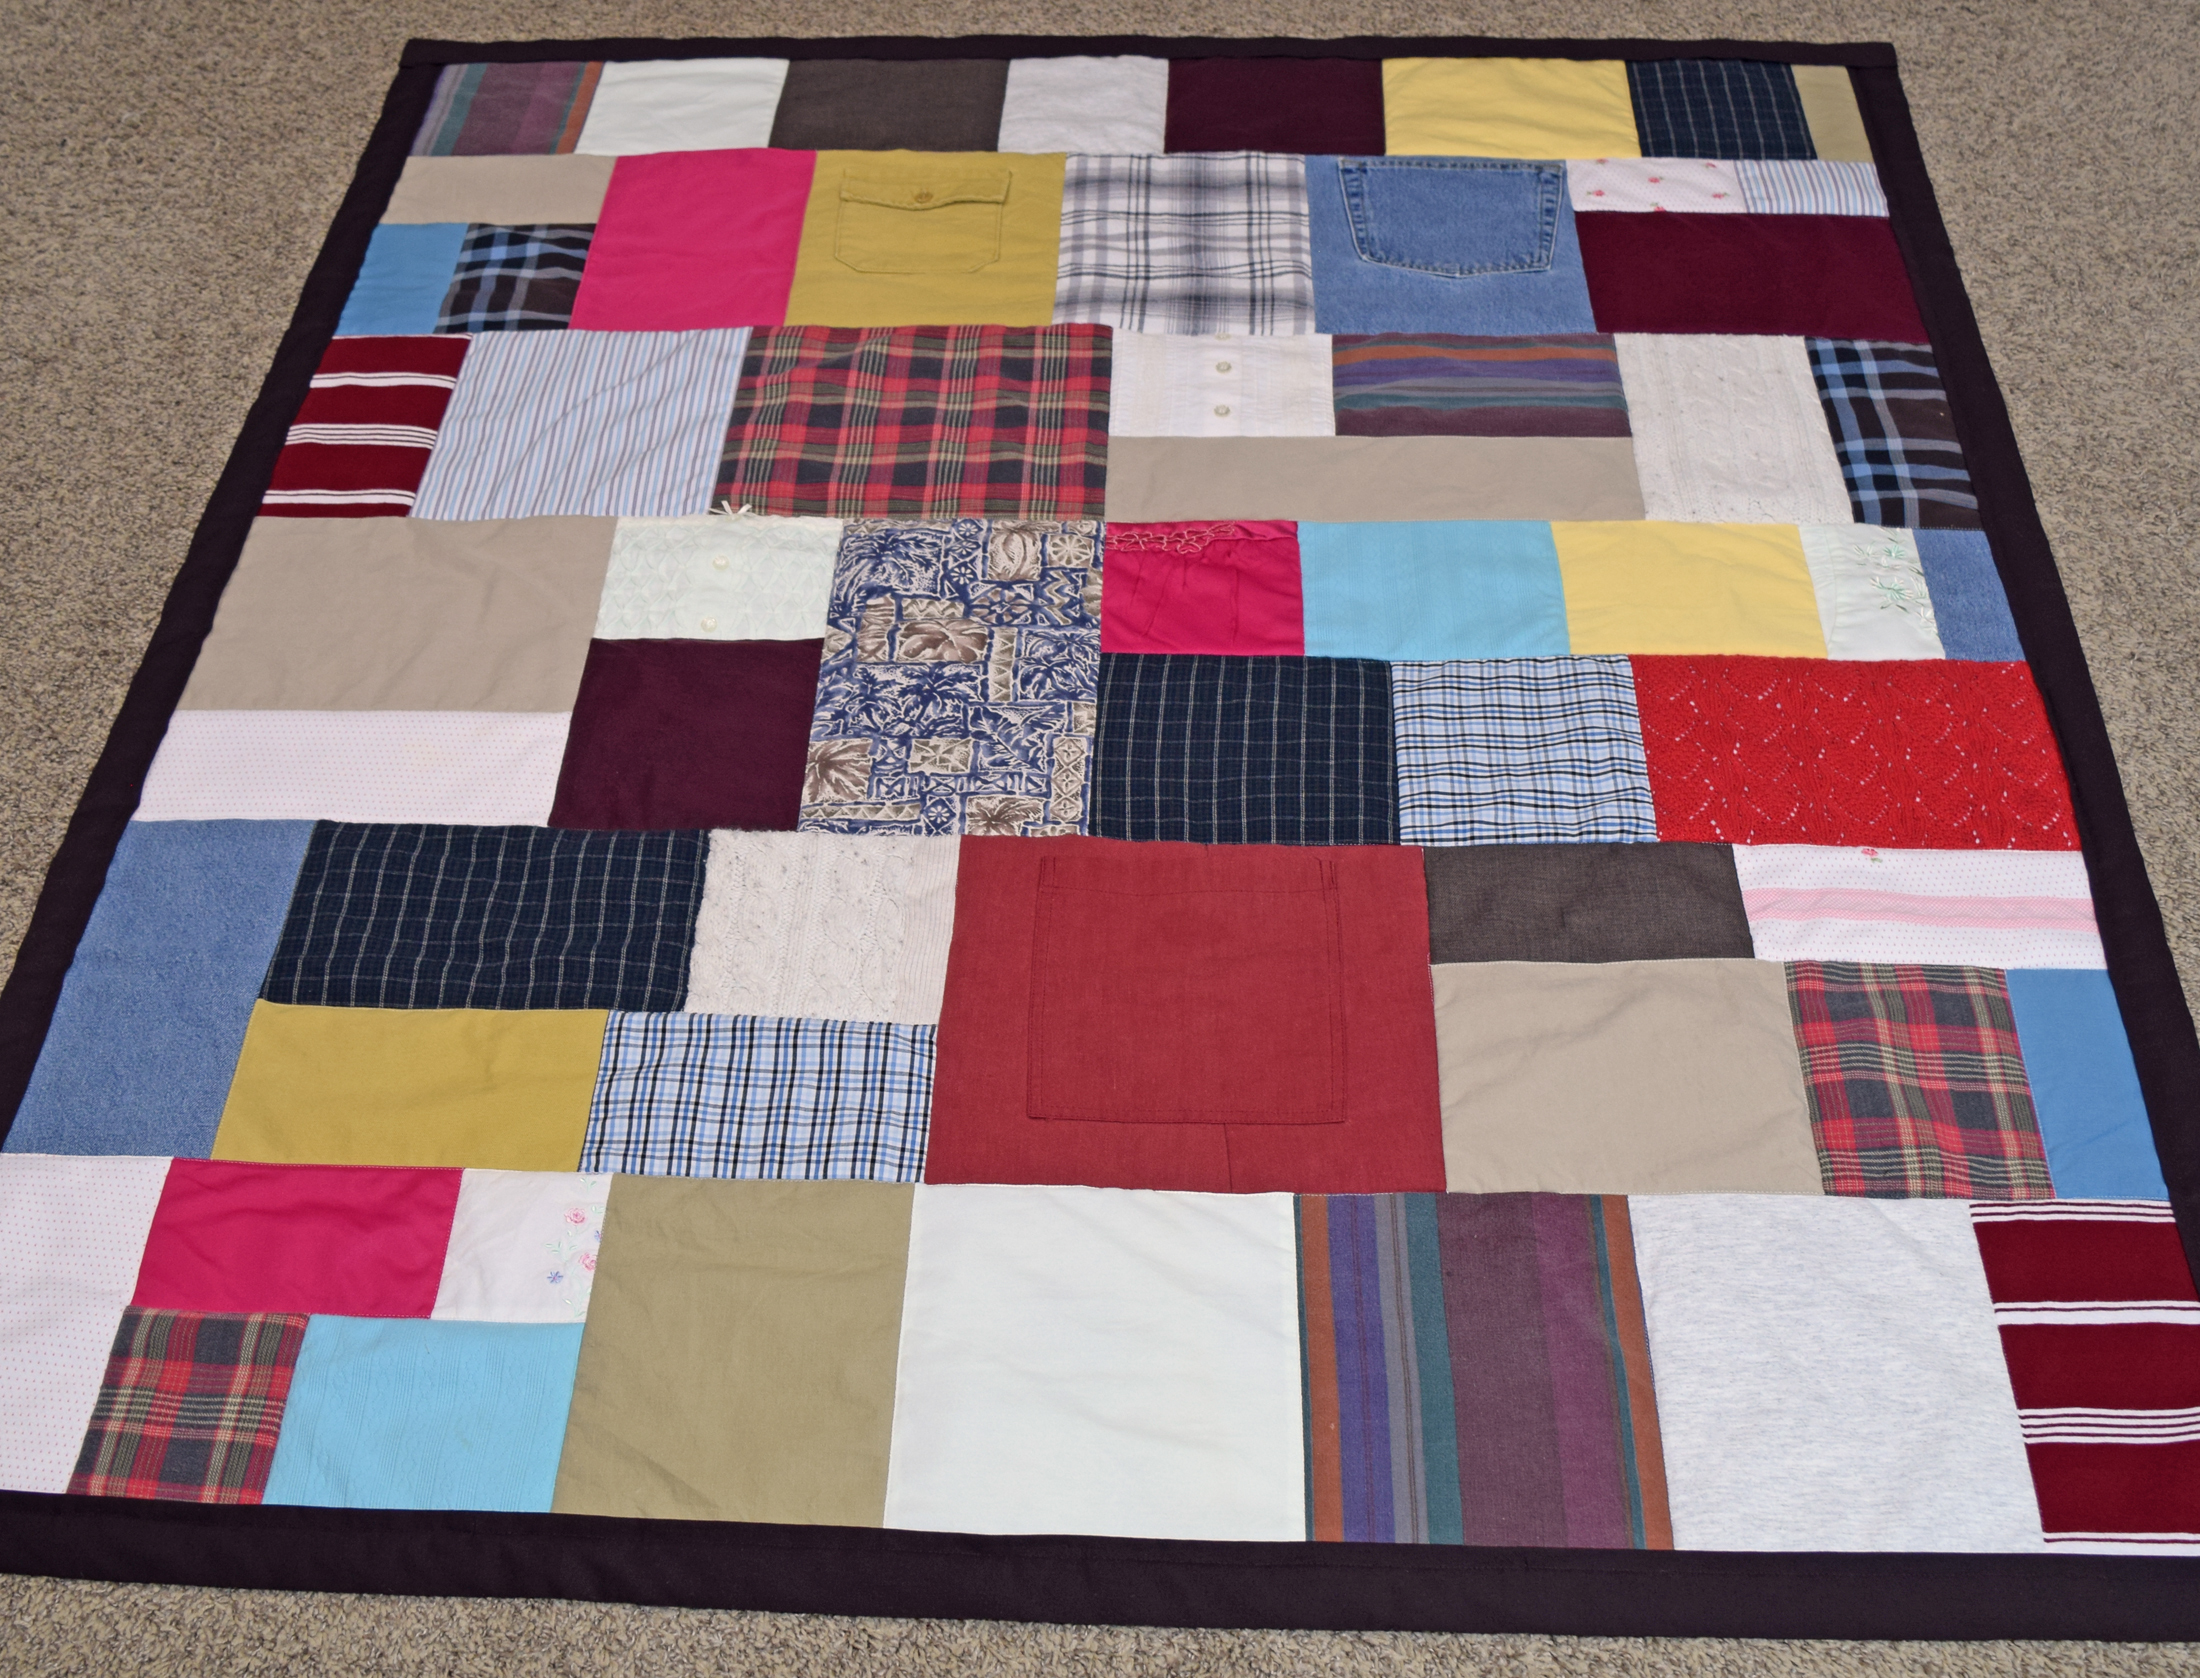 Baby Clothes Quilt Pictures | T Shirt Quilt Pictures | Jelly Bean